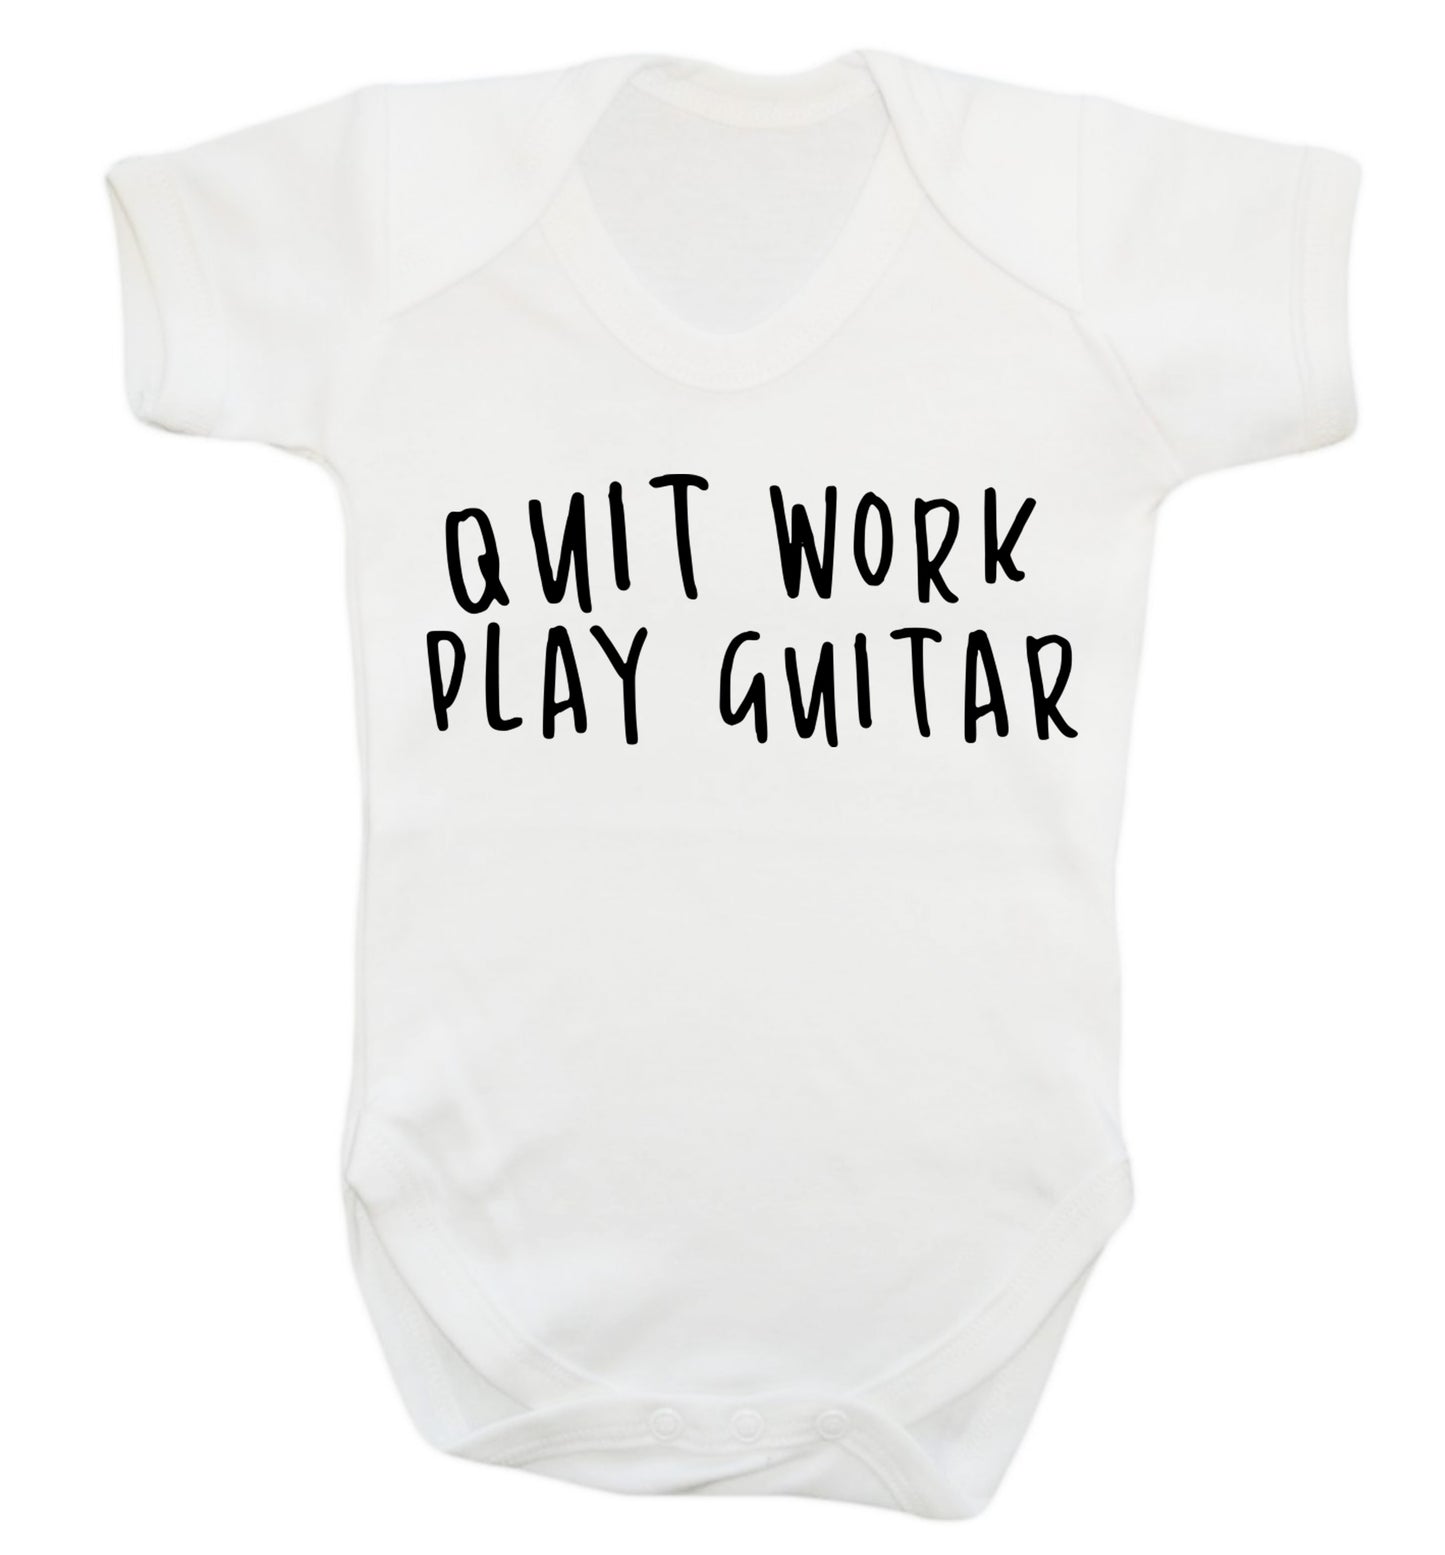 Quit work play guitar Baby Vest white 18-24 months